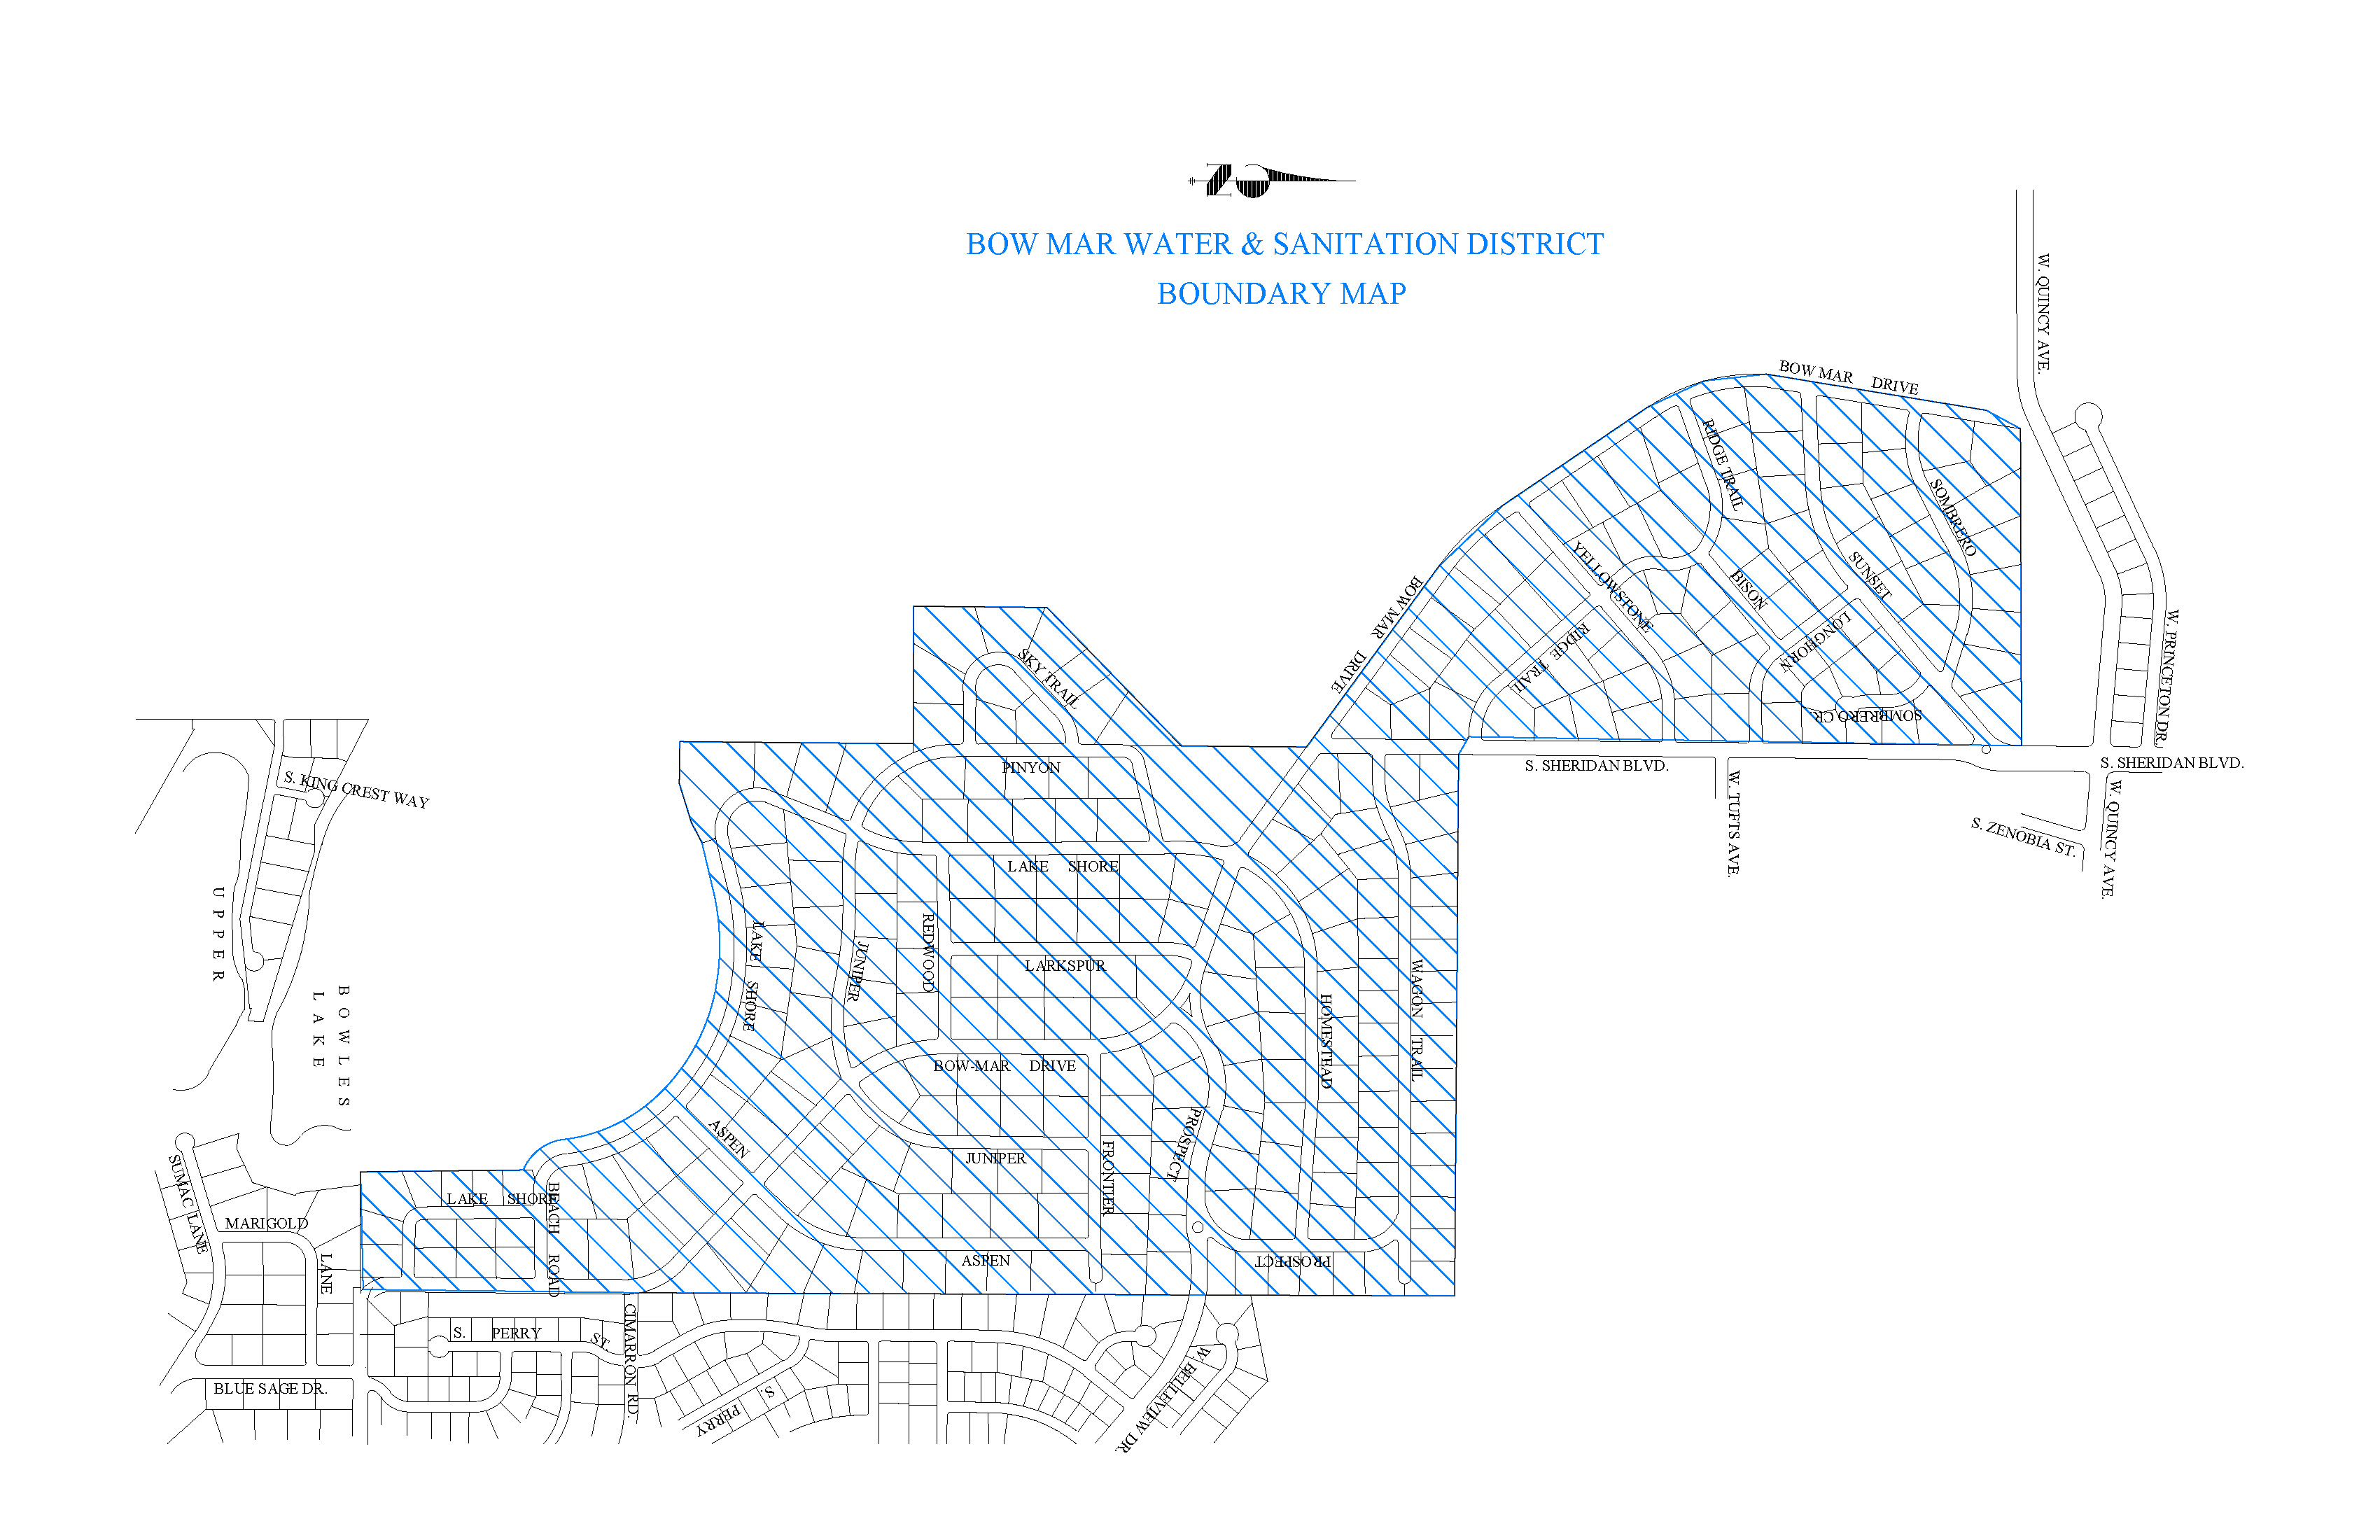 District Boundary Map - includes all of the town of Bow Mar.